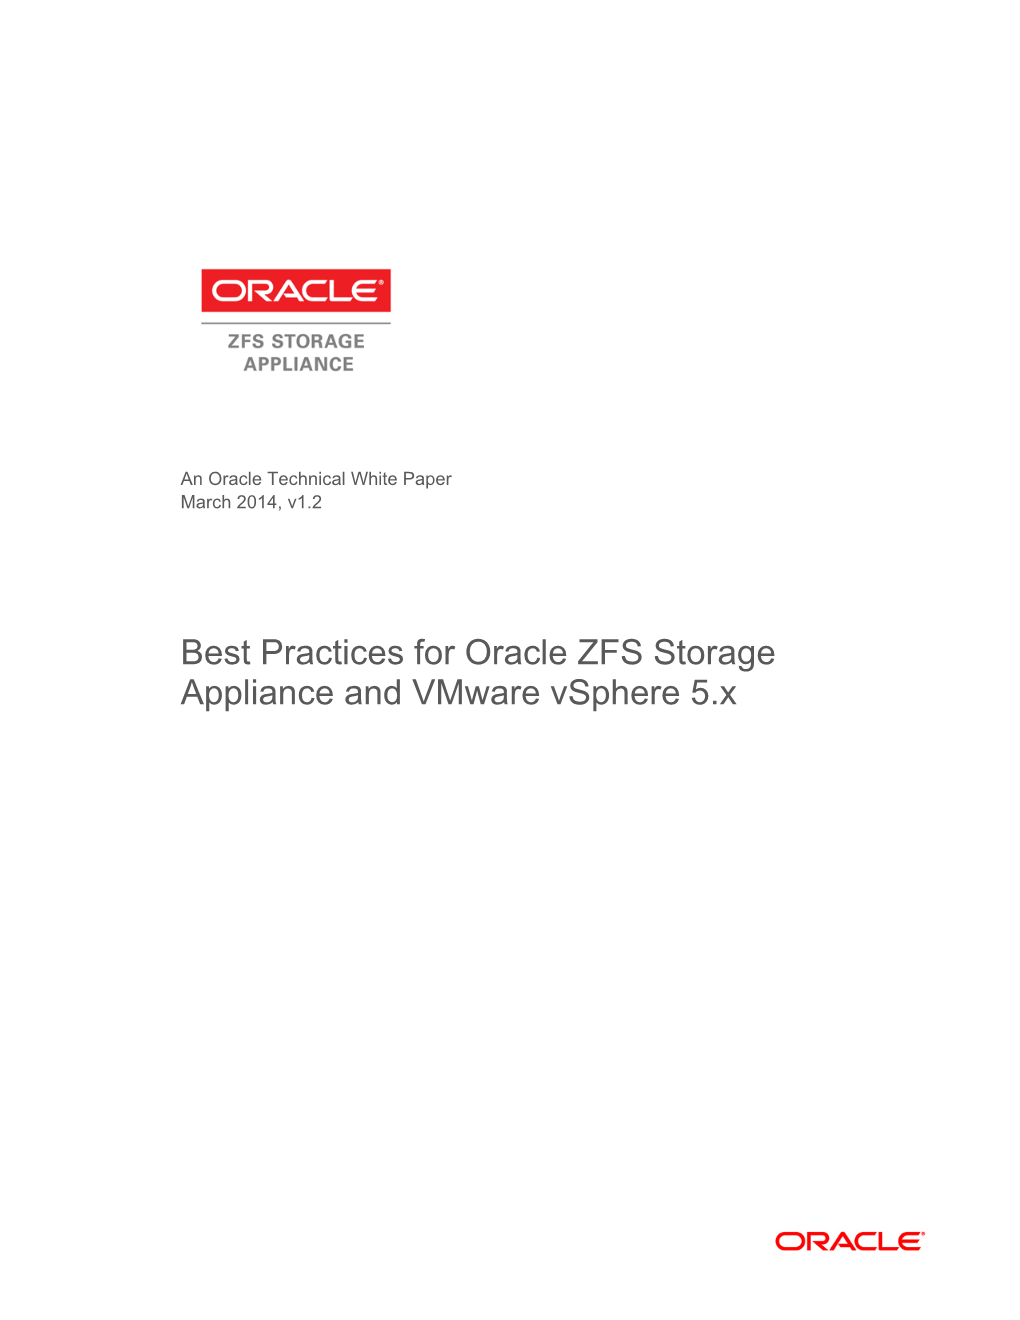 Best Practices for Oracle ZFS Storage Appliance and Vmware Vsphere 5.X